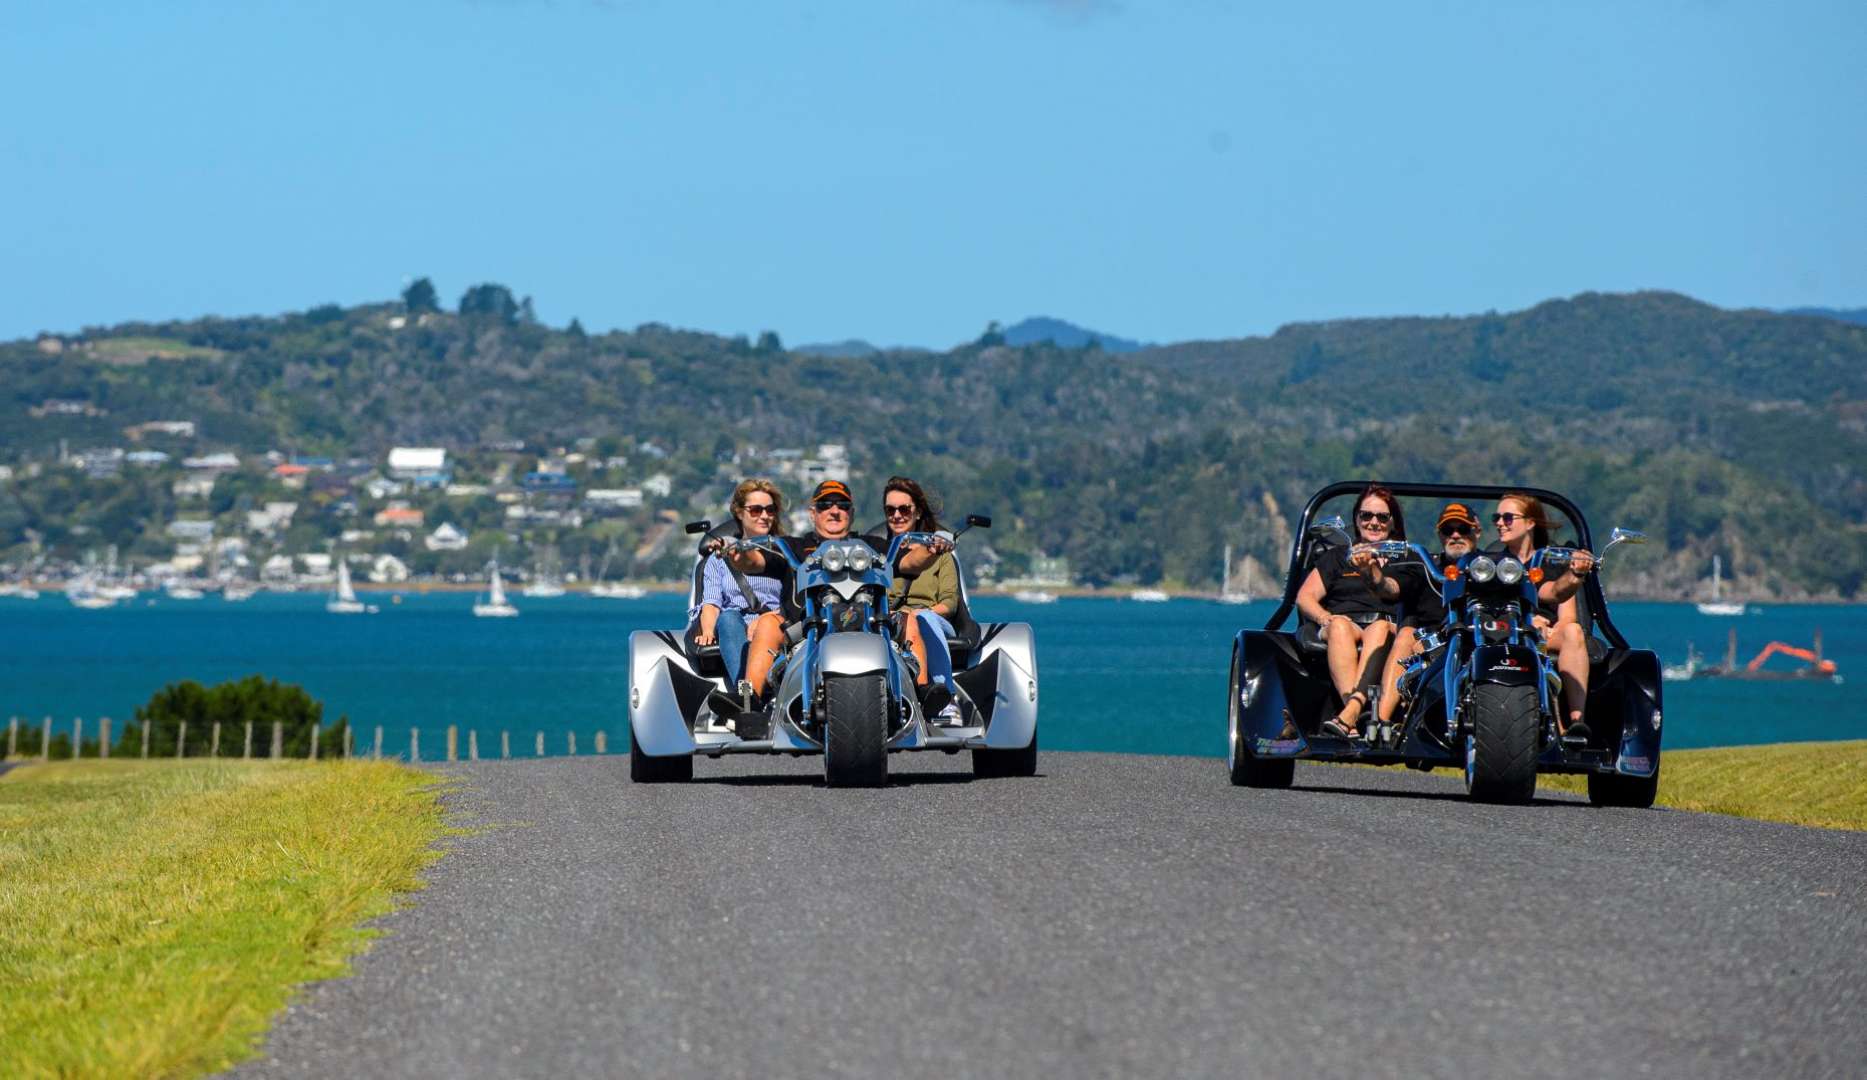 Thunder Trike Tours are a fun thing to do in the Bay of Islands